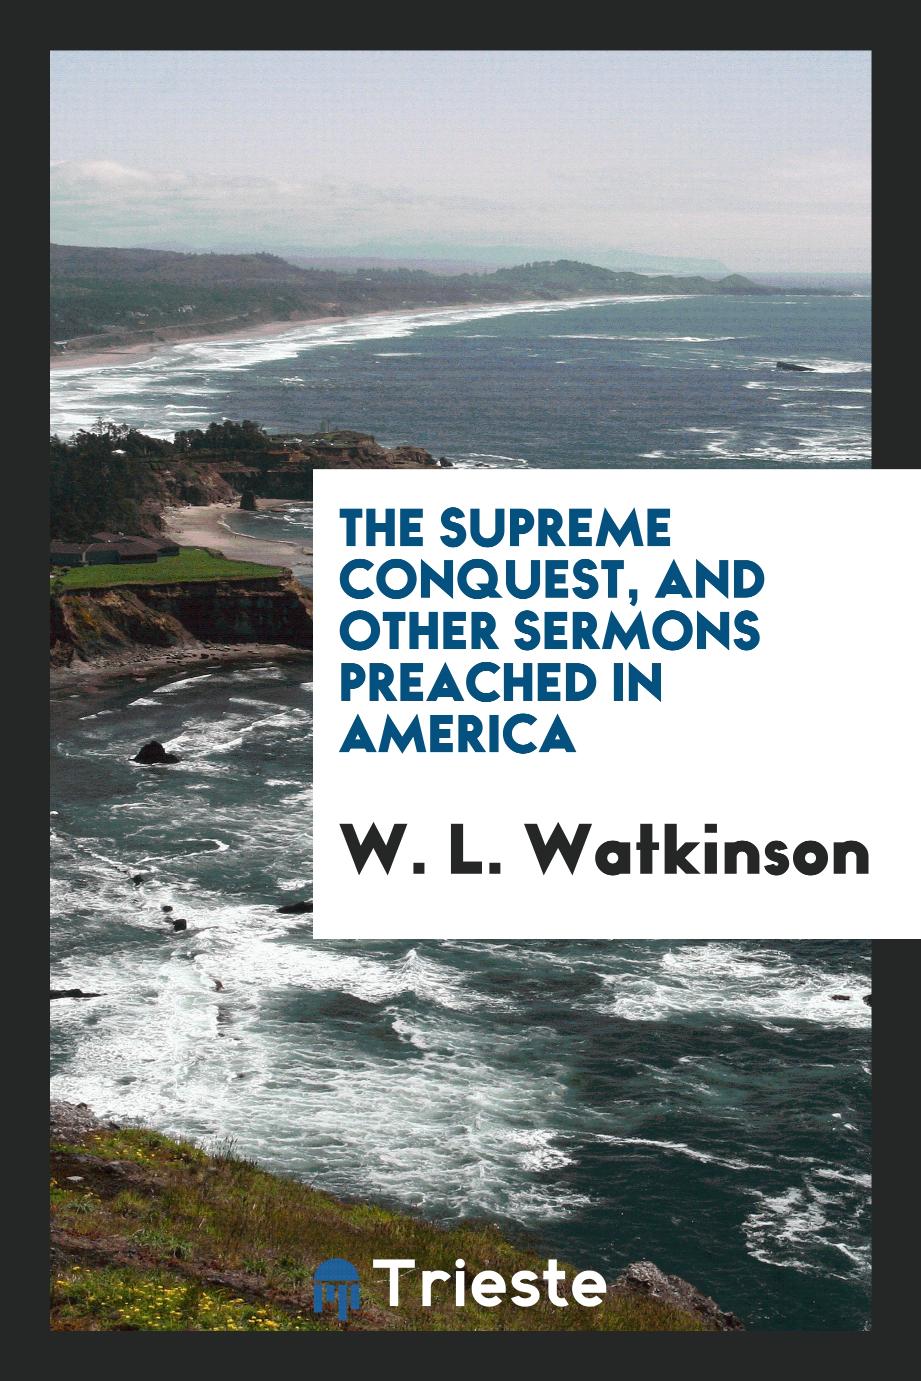 The supreme conquest, and other sermons preached in America